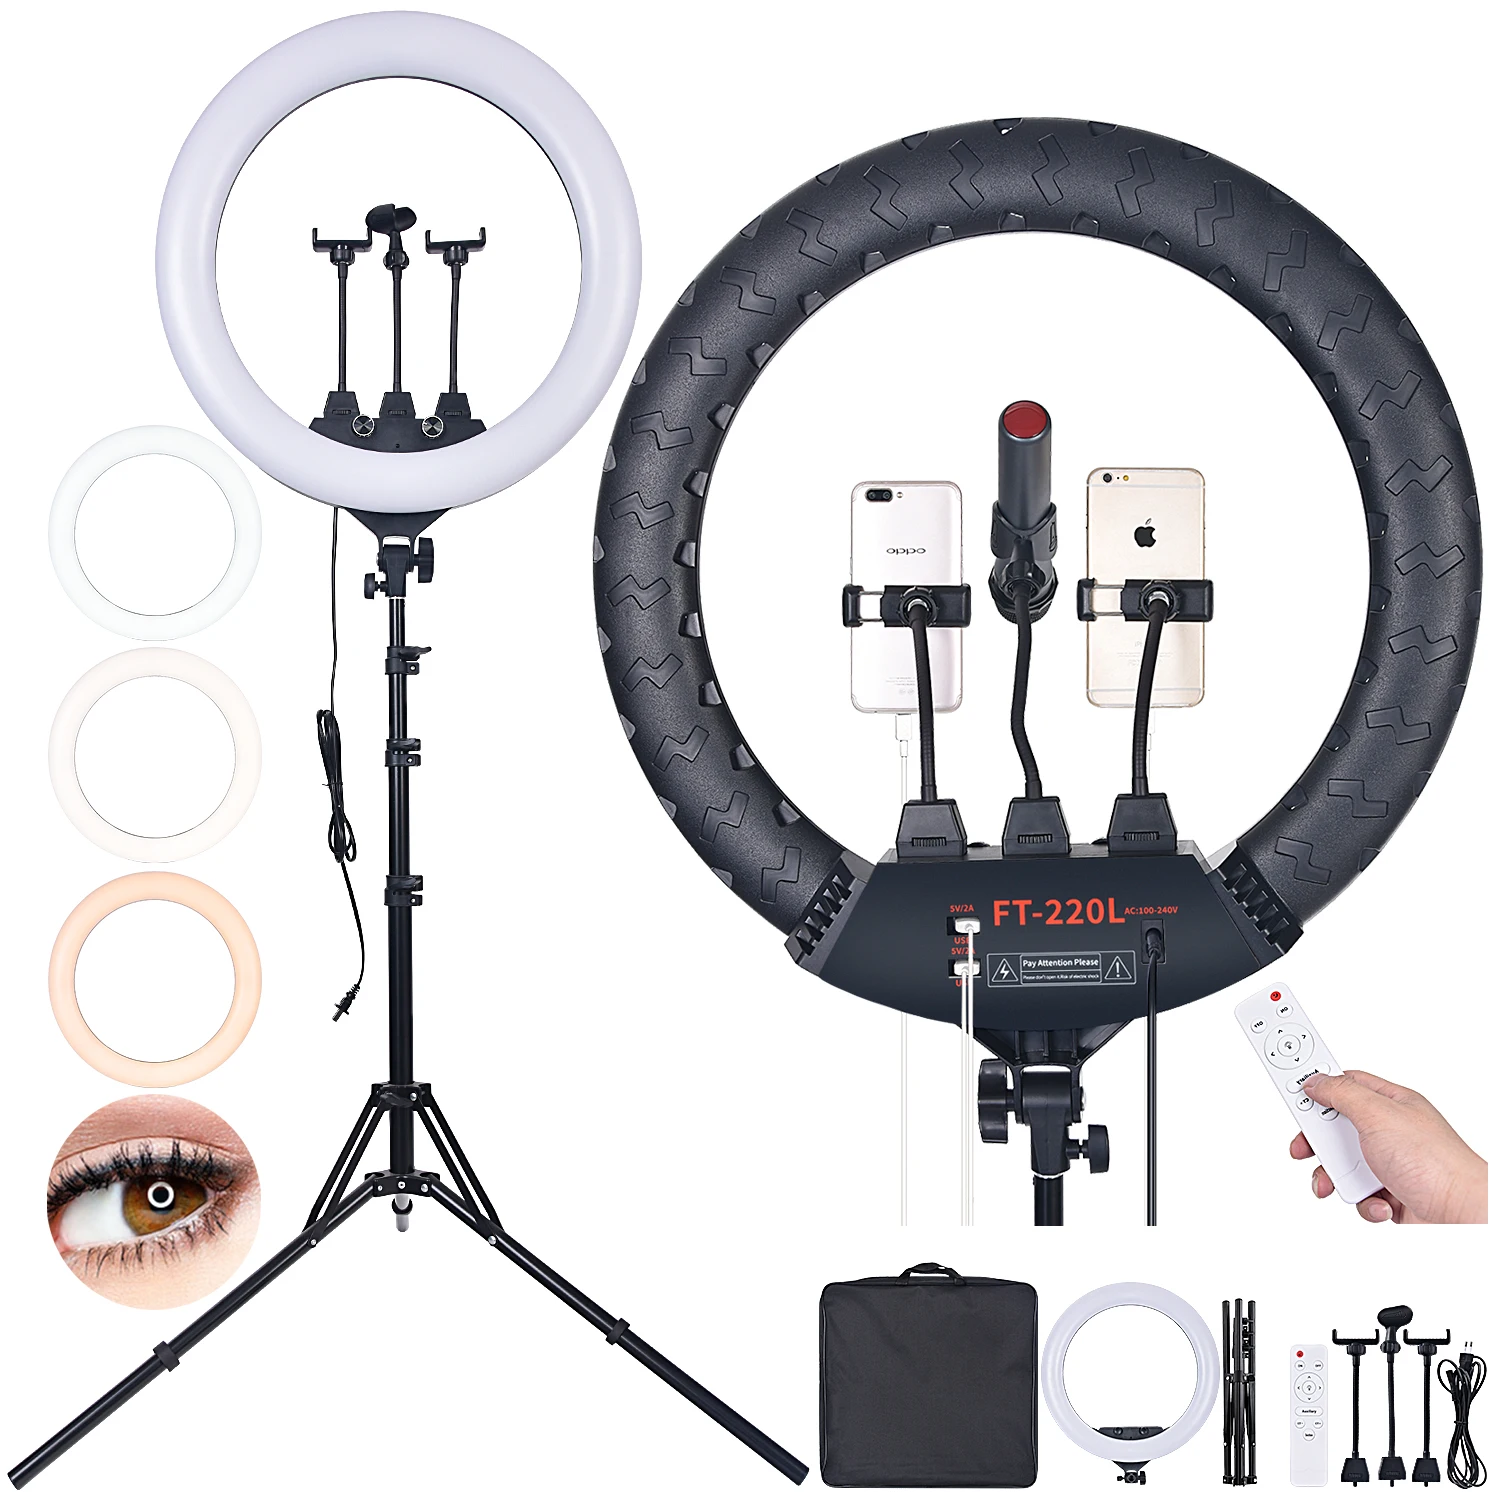 

Mexico Free Shipping FOSOTO FT-220L 22 Inch cheapest remote youtube tiktok big LED ring light with tripod and microphone holder, Black